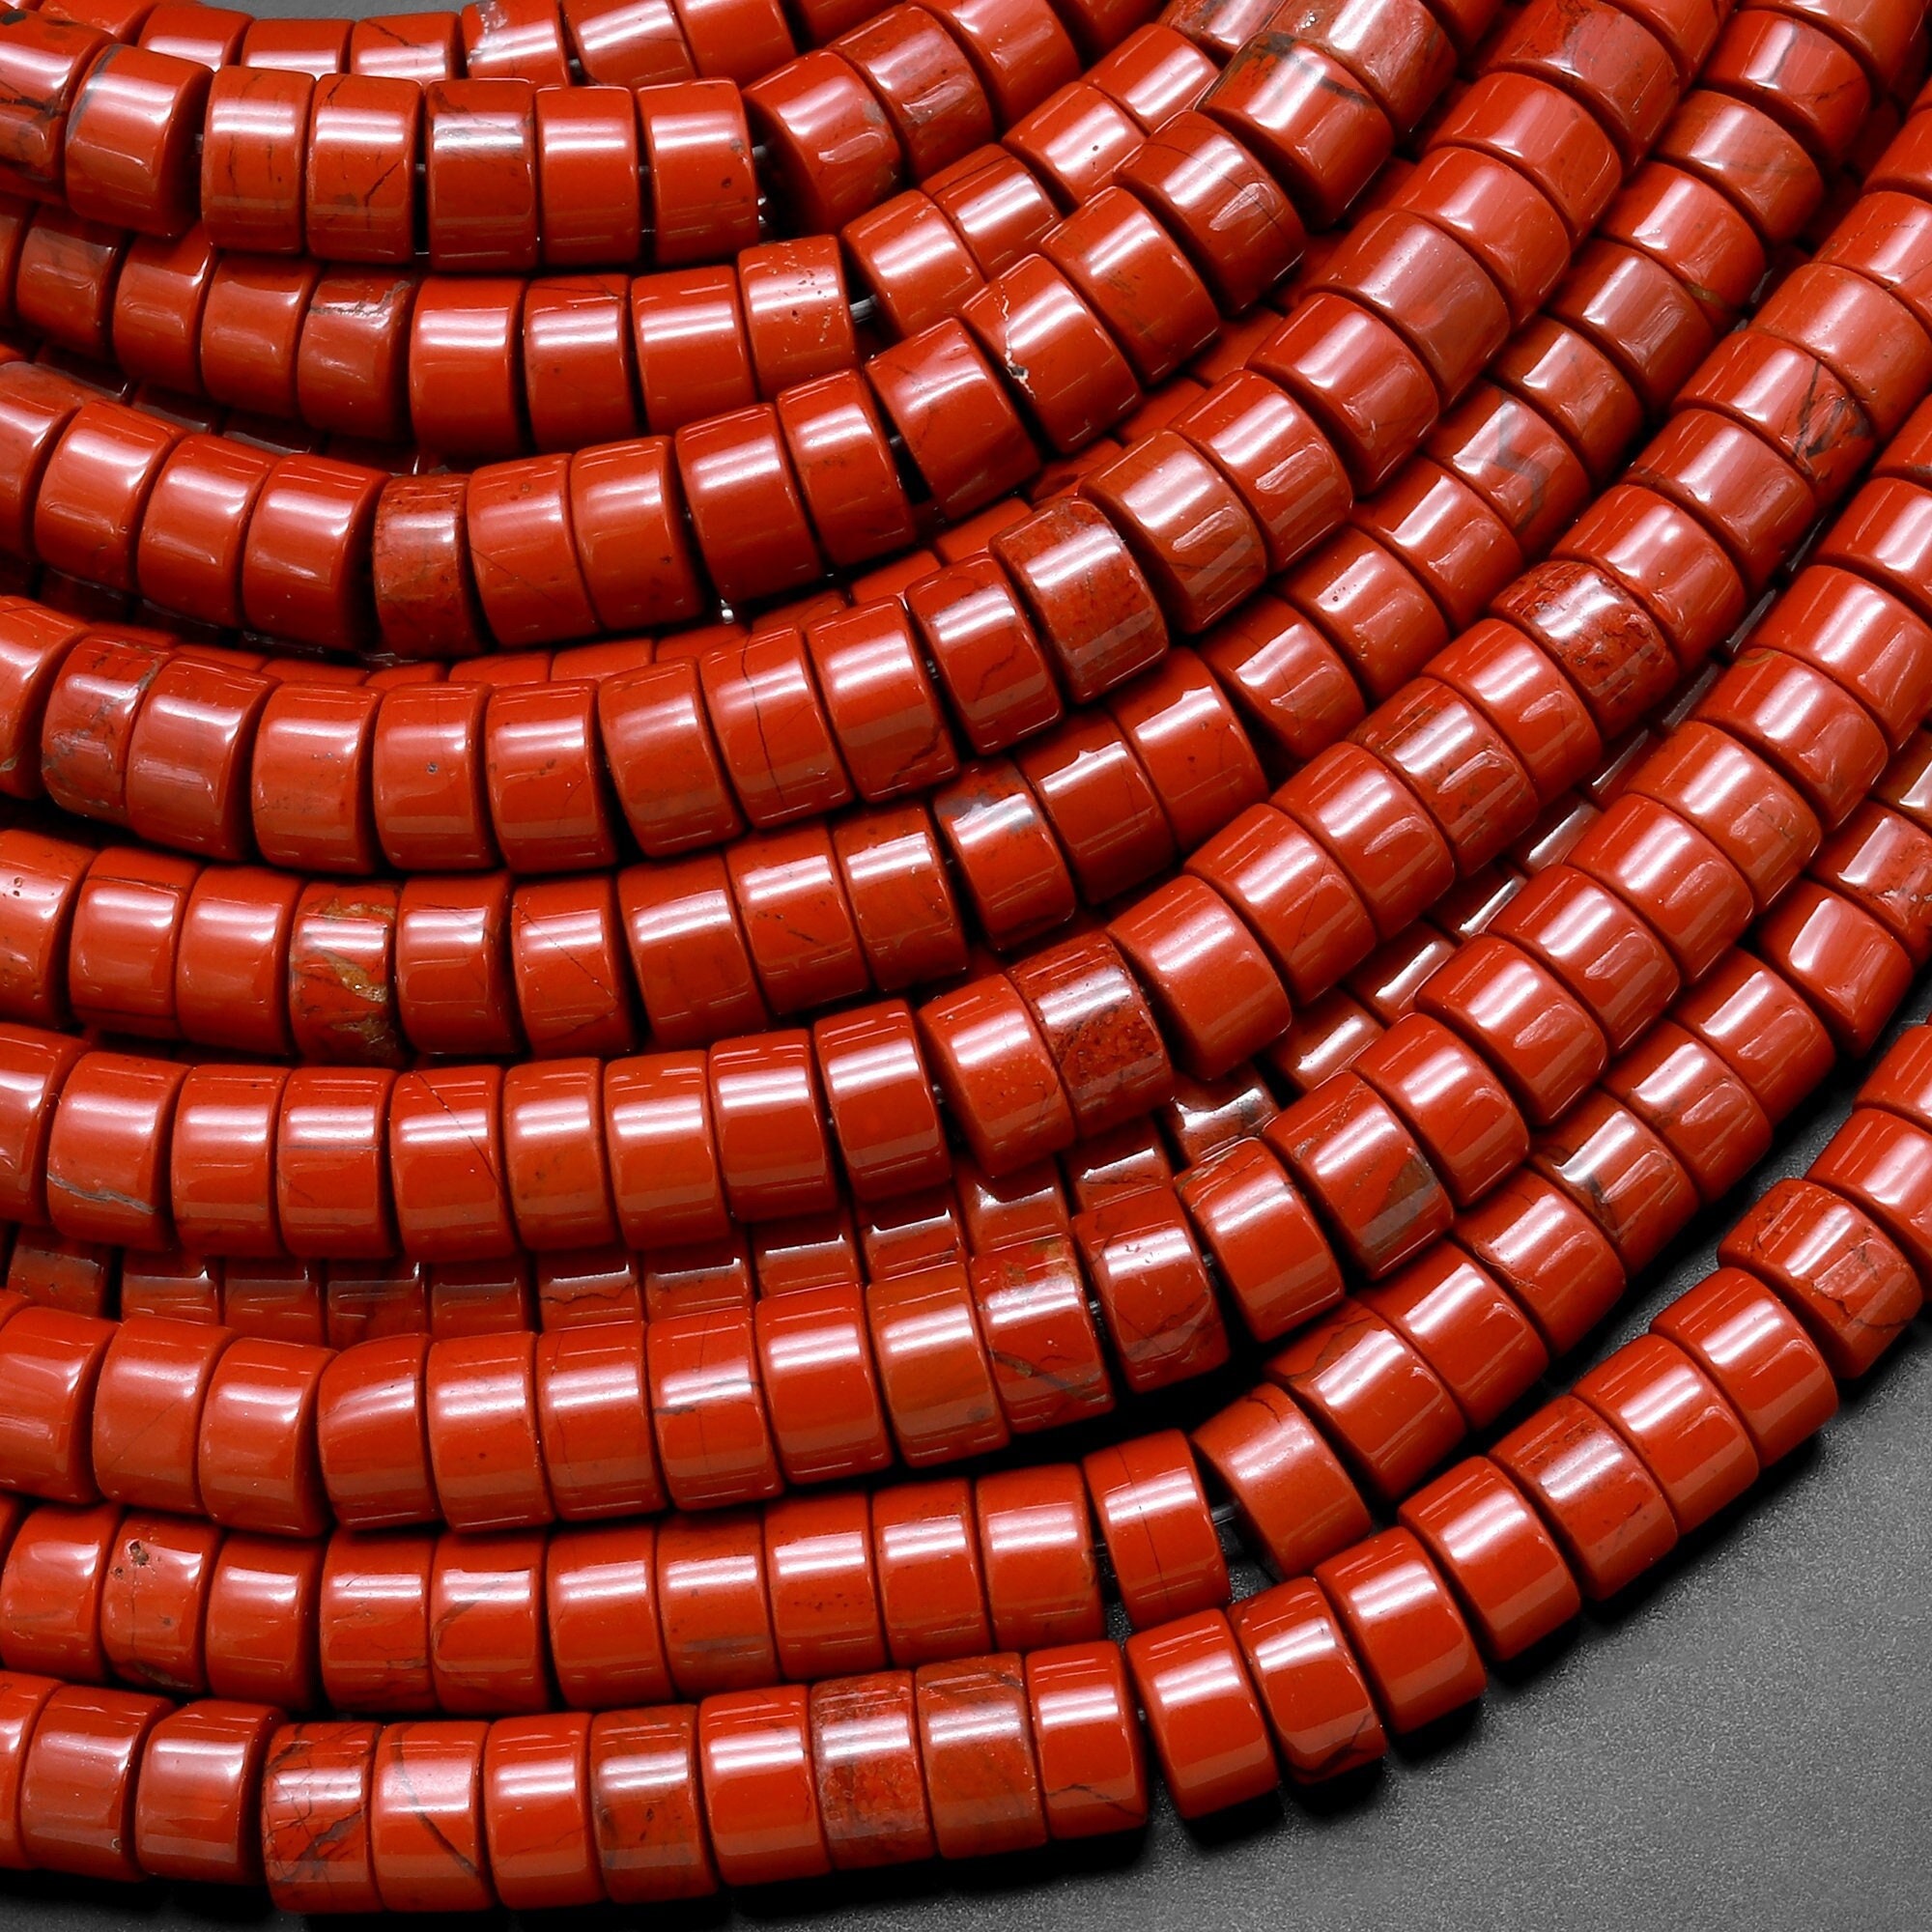 Red Beads Brick Red Beads 6mm Glass Beads 6mm Beads BULK Beads Wholesale  Beads 136 pieces Bulk Bead Unique Glass Beads